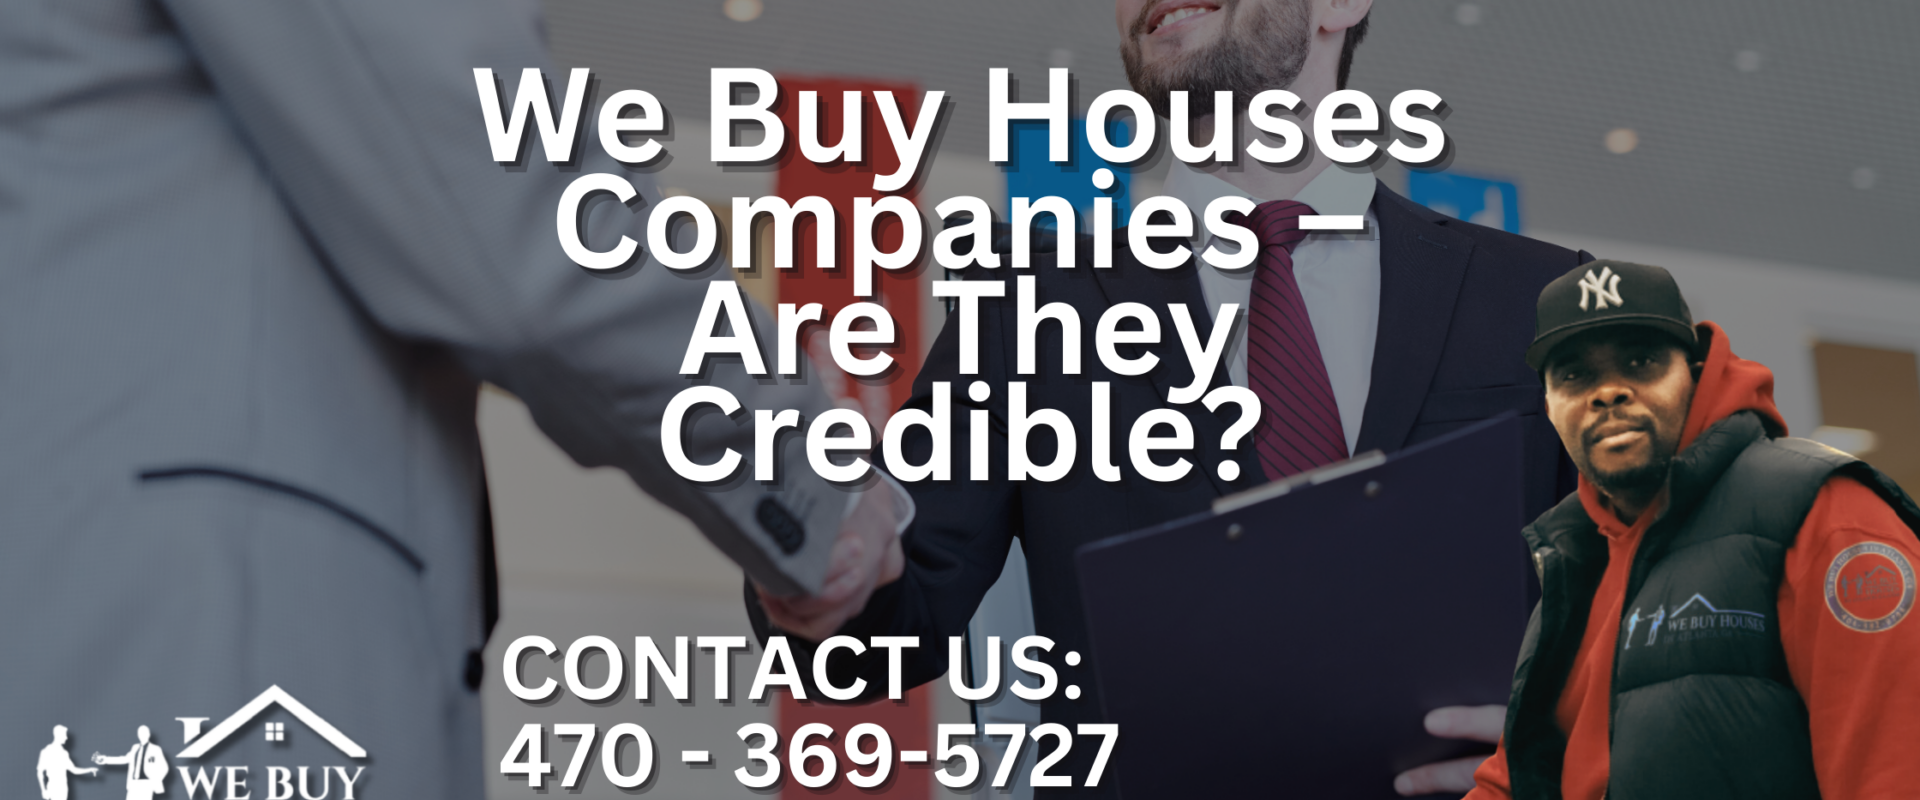 We Buy Houses Companies – Are They Credible?